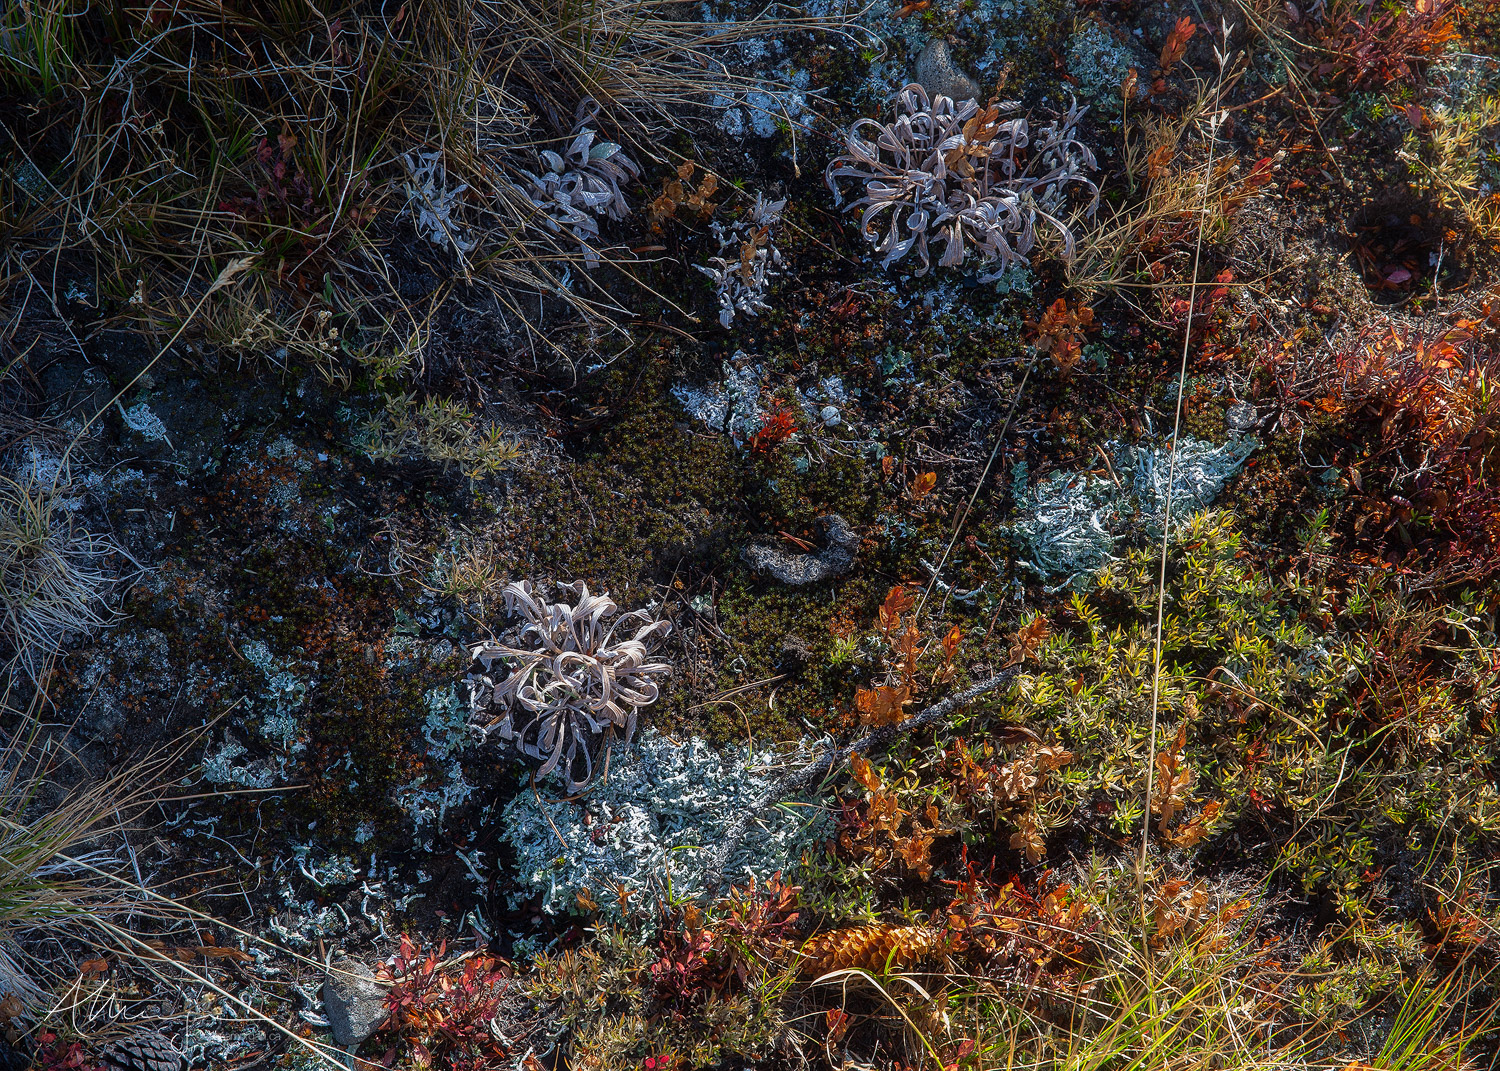 Lichens, mosses and grasses in an alpine glacial boulder field